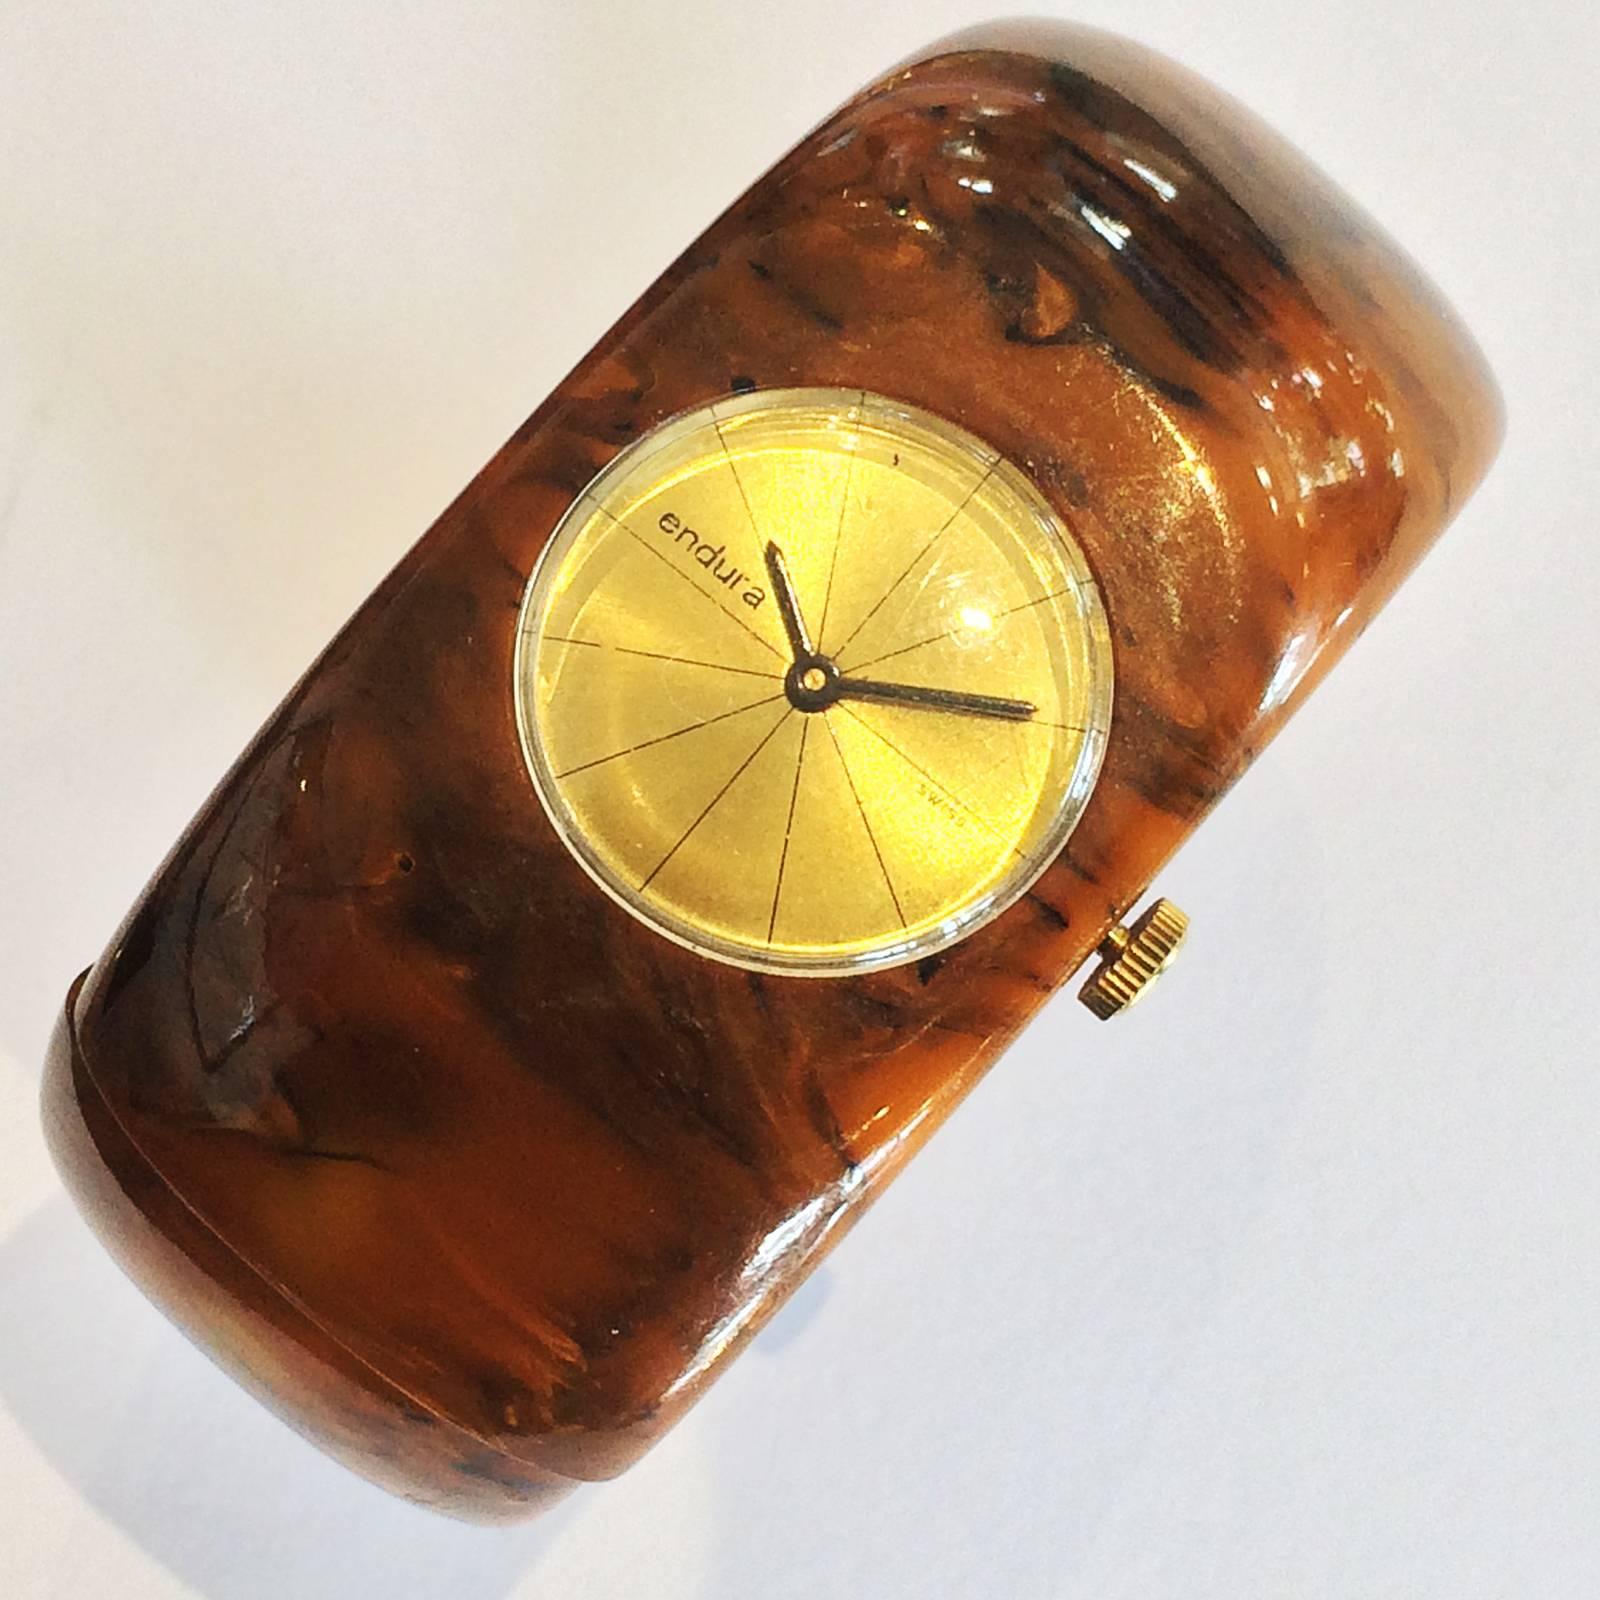 Art Deco Clamper Style Wrist Watch in “Mississippi Mud” colour Bakelite, by 